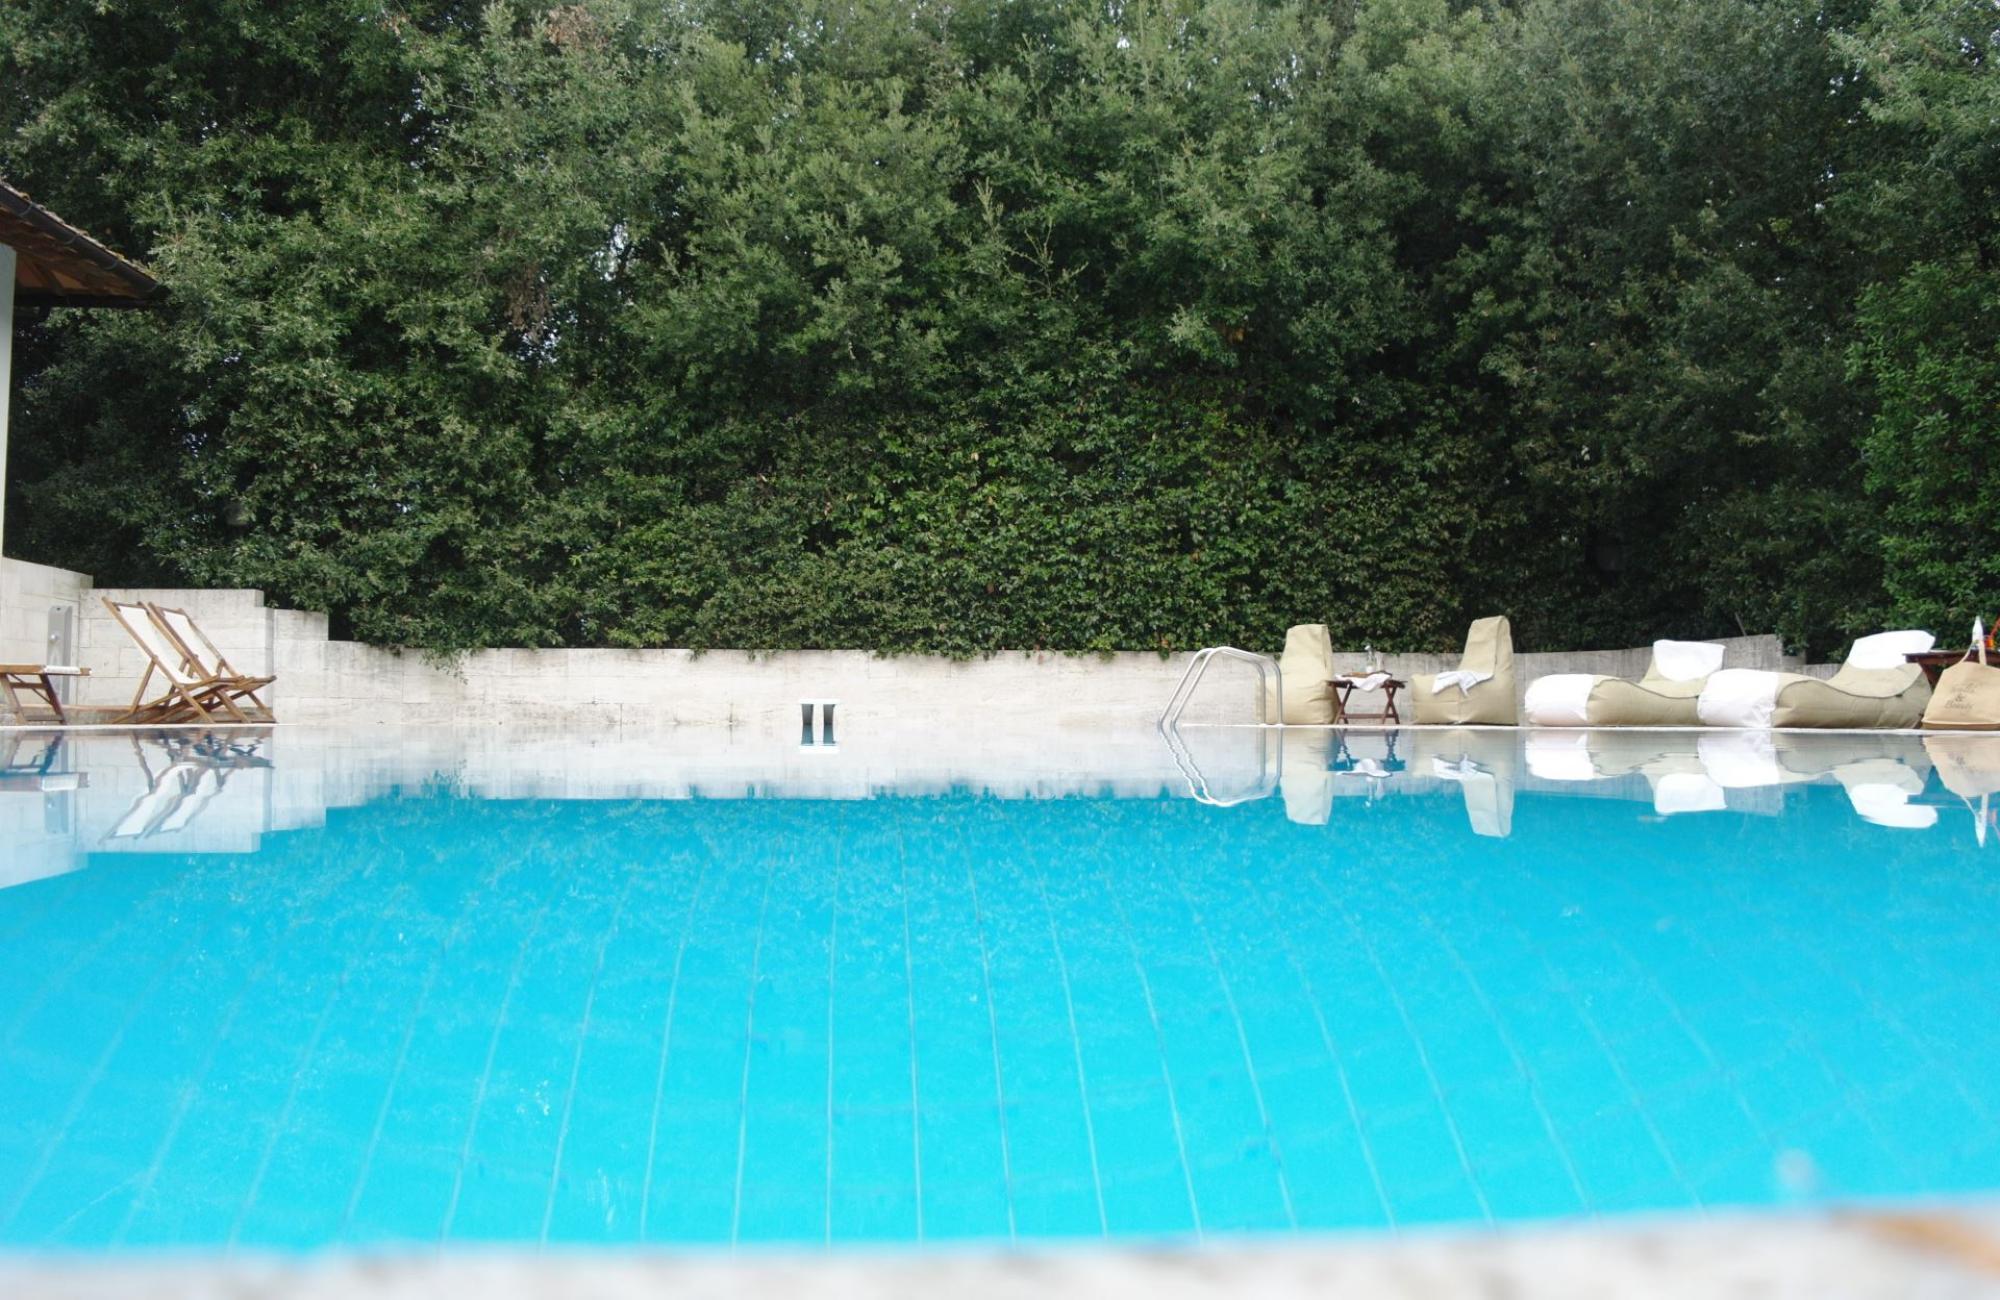 Property Image 1 - Marvellous Villa near San Gimignano with stunning infinity Pool  big private parc and AC  Wedding ve-VILLA